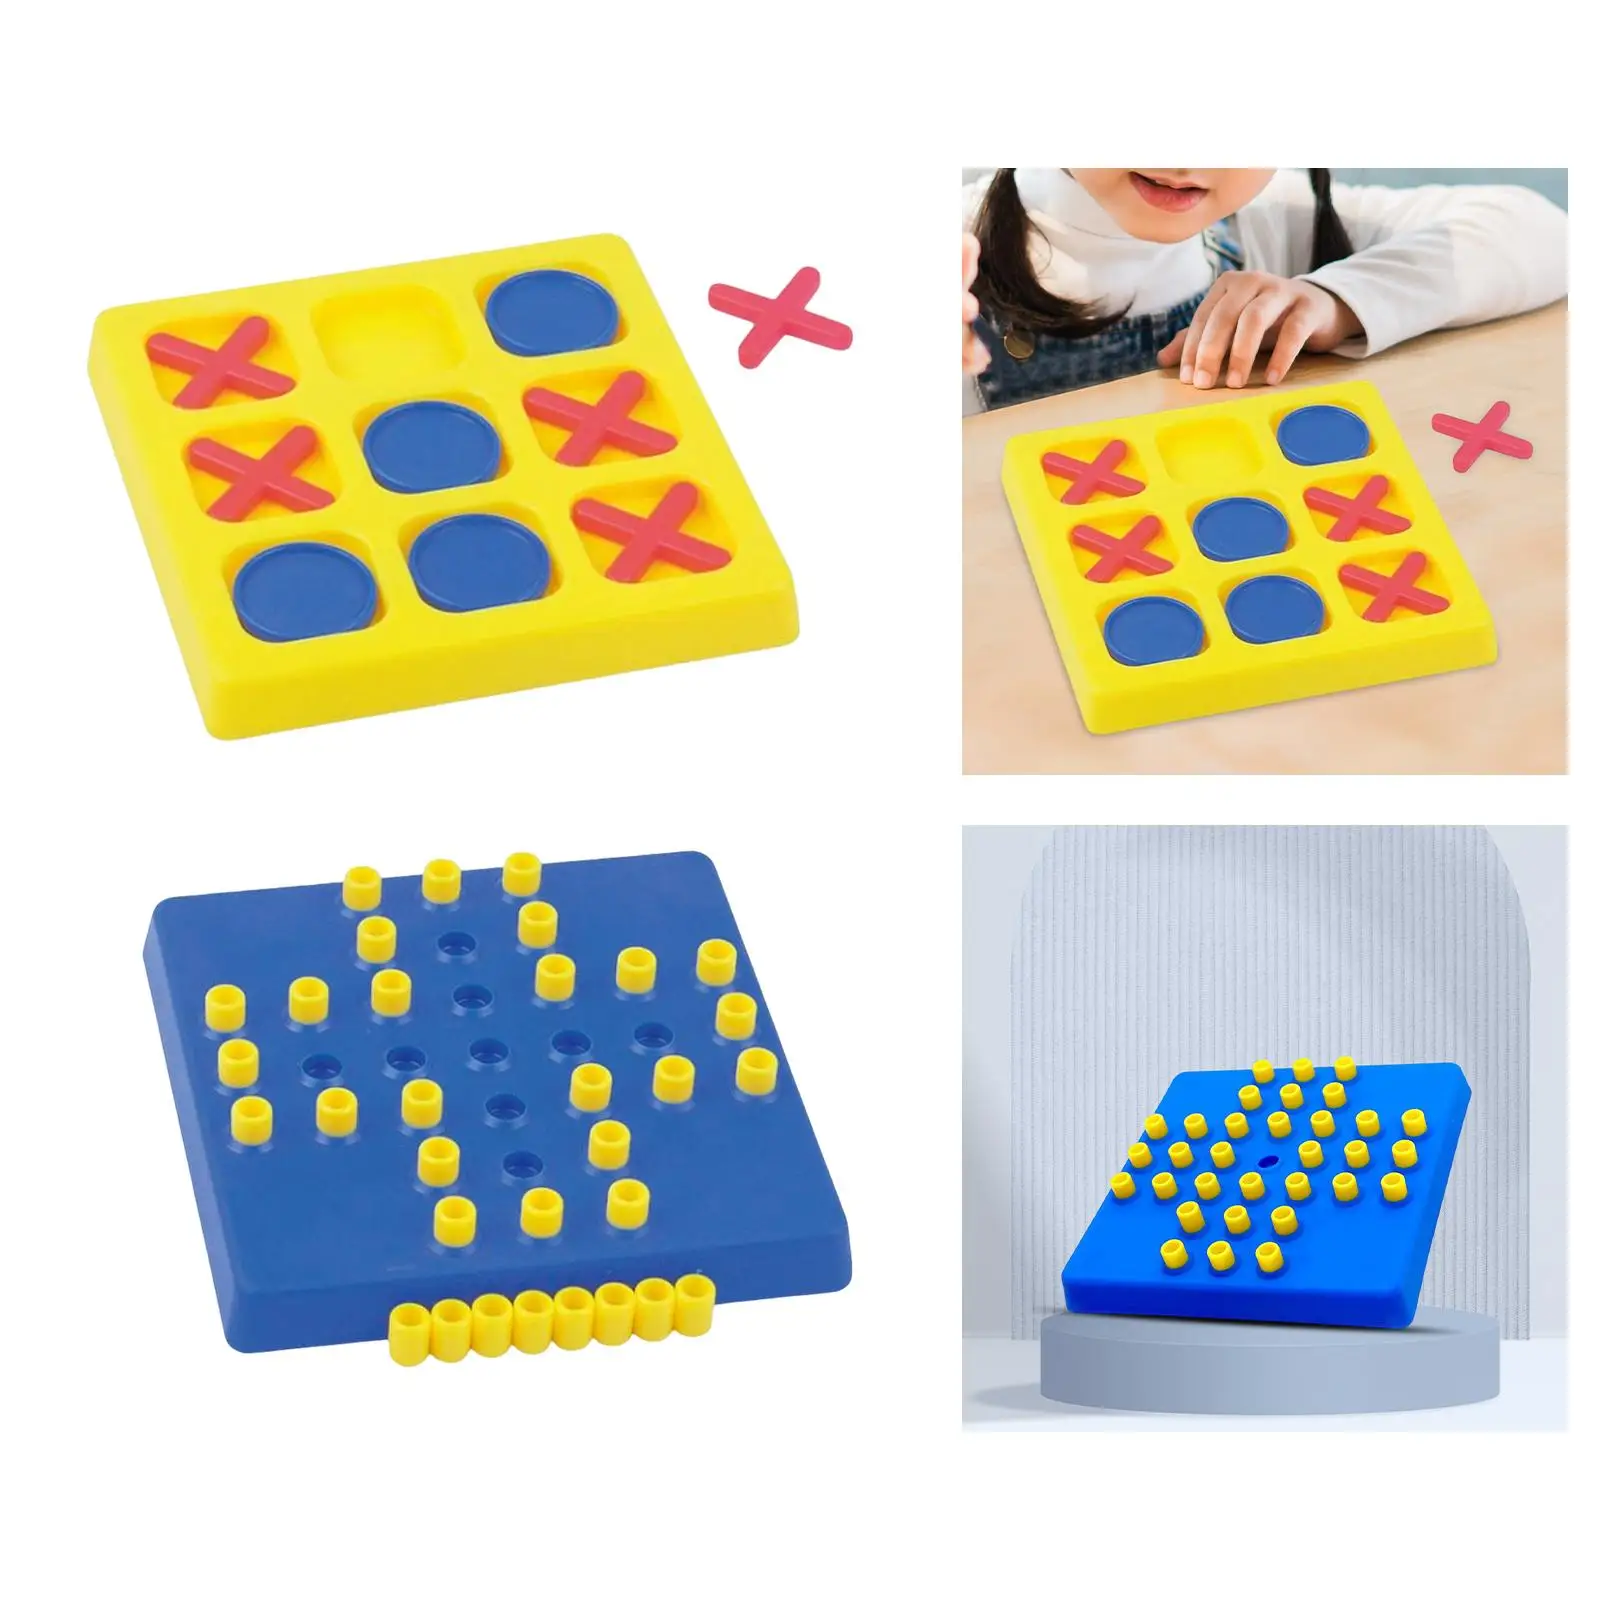 Tic TAC Toe Game Noughts and Crosses Double Battle Practical Brain Teaser Jump Marbles Marble Solitaire Board Game for Party